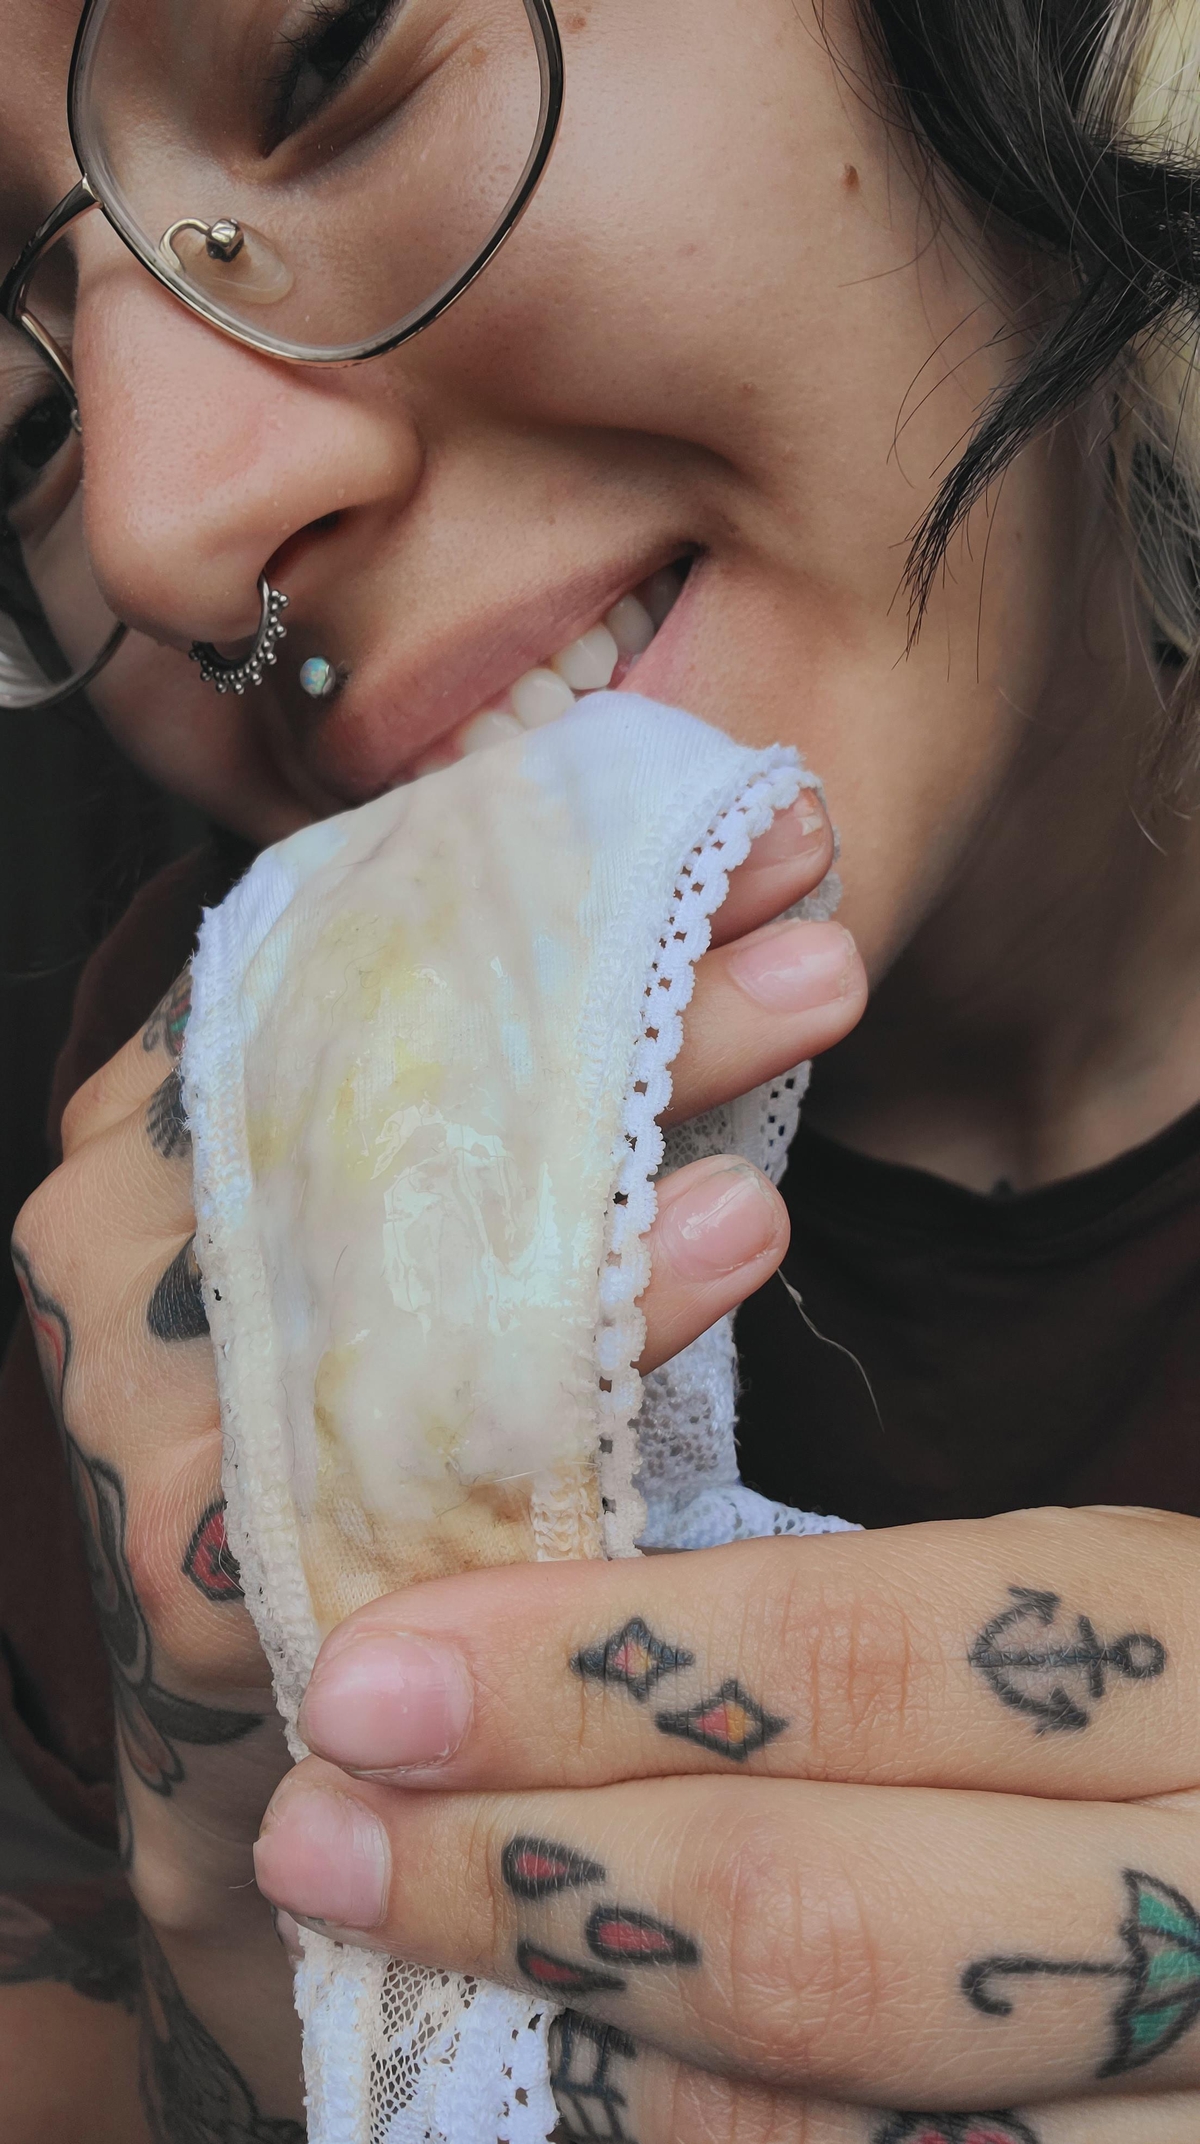 India Rose showing her pussy goo